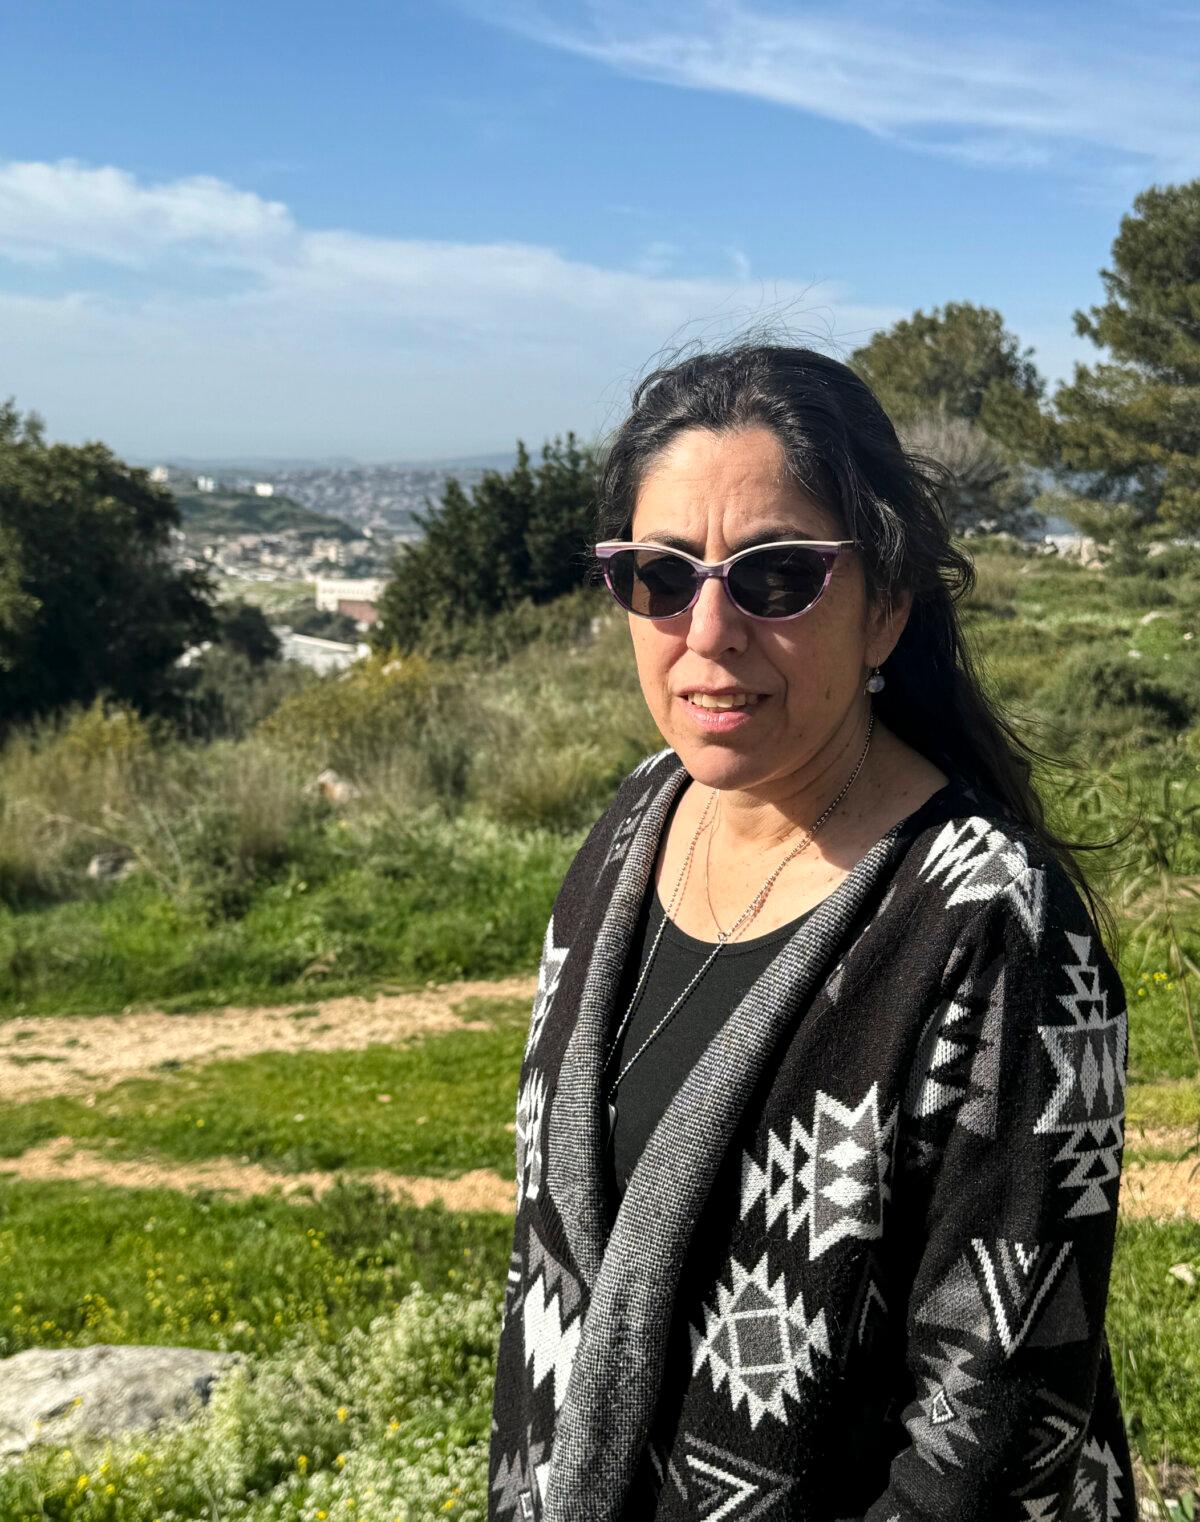 Sarit Zehavi, a retired Israeli intelligence officer, and expert on its northern front with Lebanon and Syria. (Dan M. Berger/The Epoch Times)